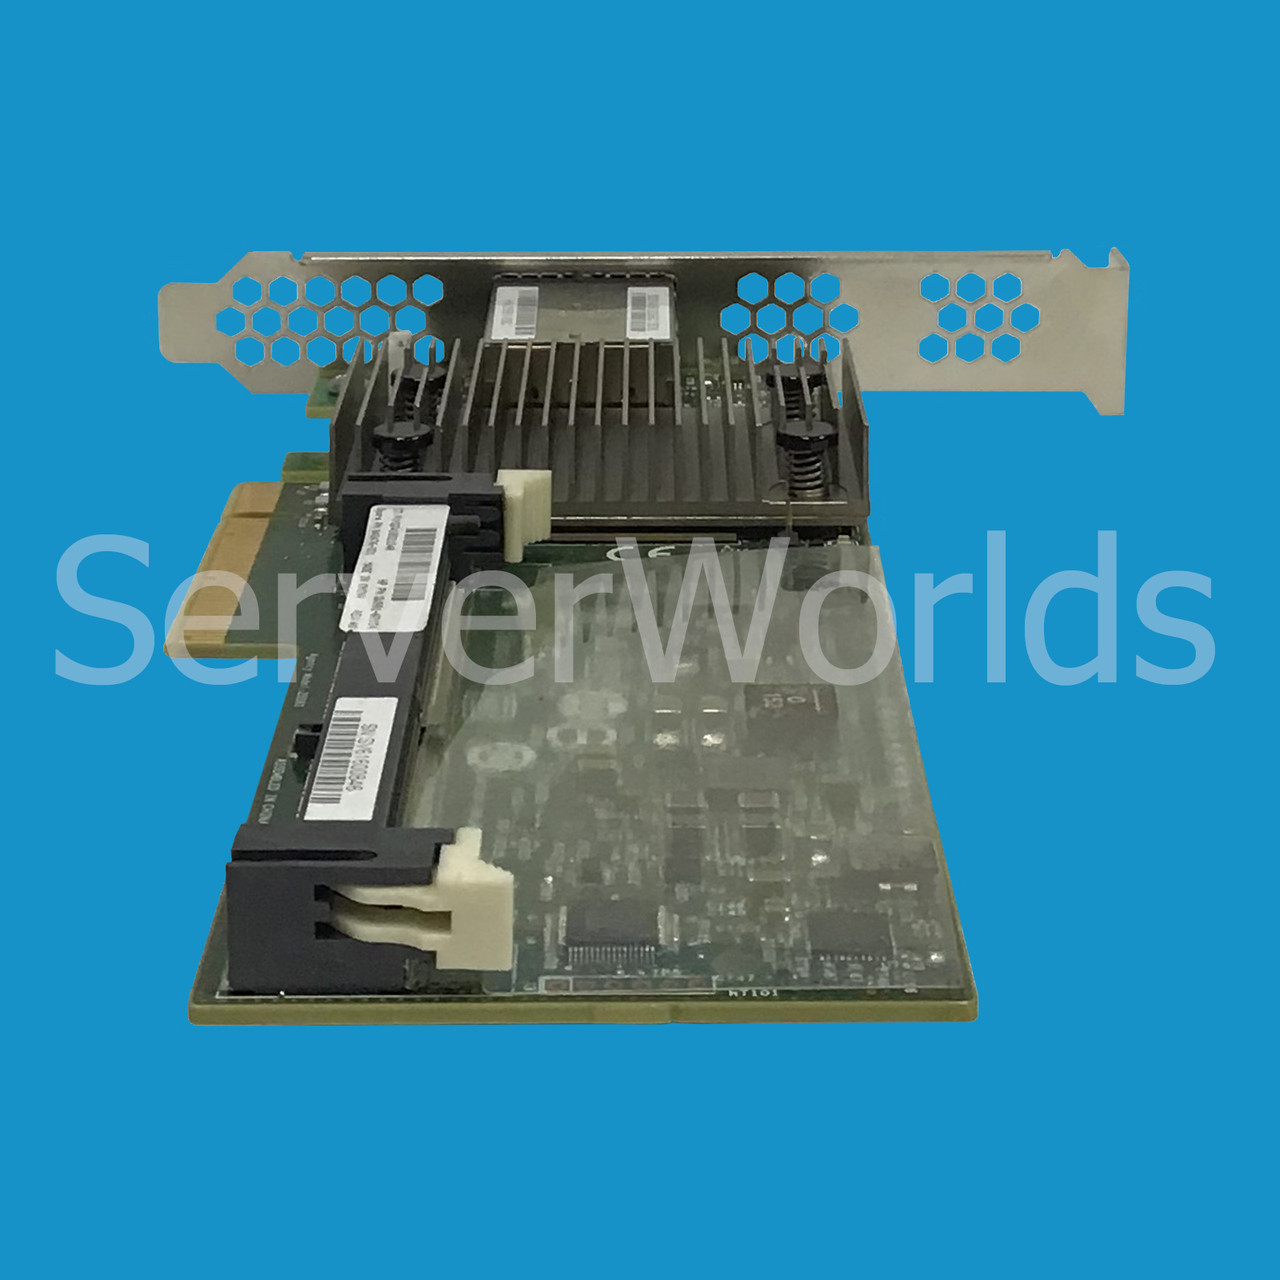 HP 842476-001 8E PCA Board without encryption QW991-60104